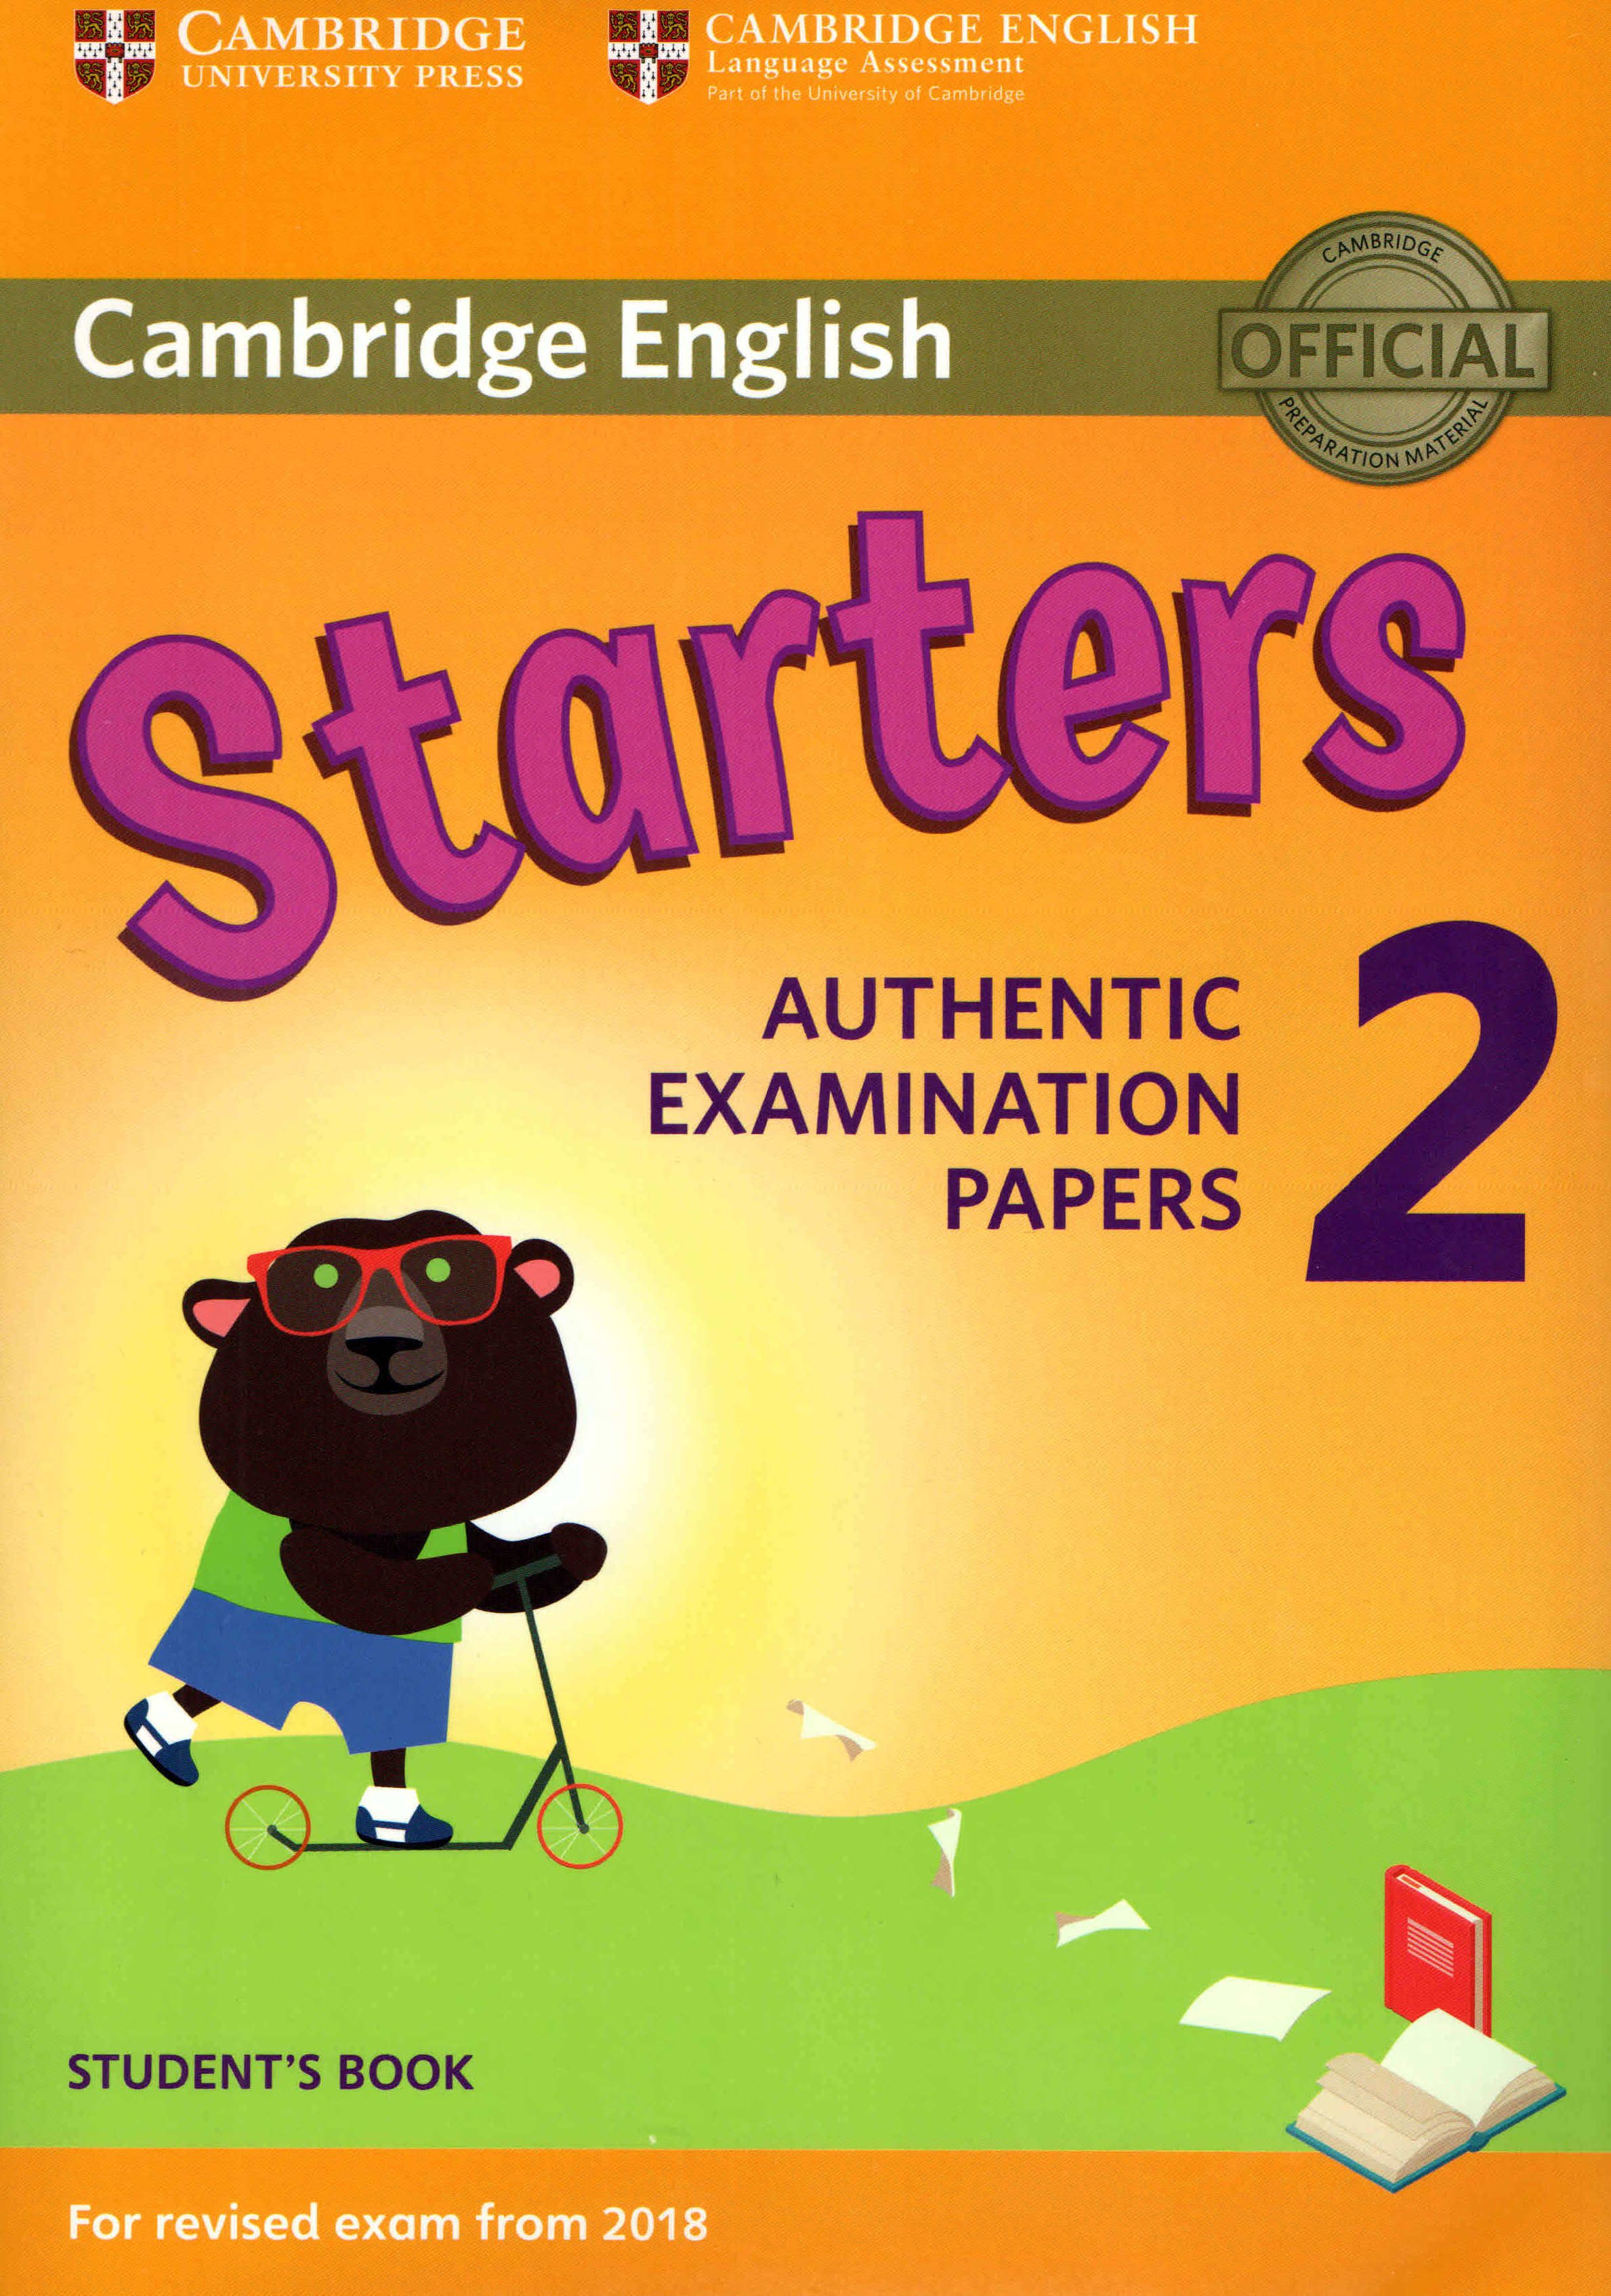 Cambridge English Young Learners 2 for Revised Exam from 2018. Starters Student's Book. Authentic Examination Papers 